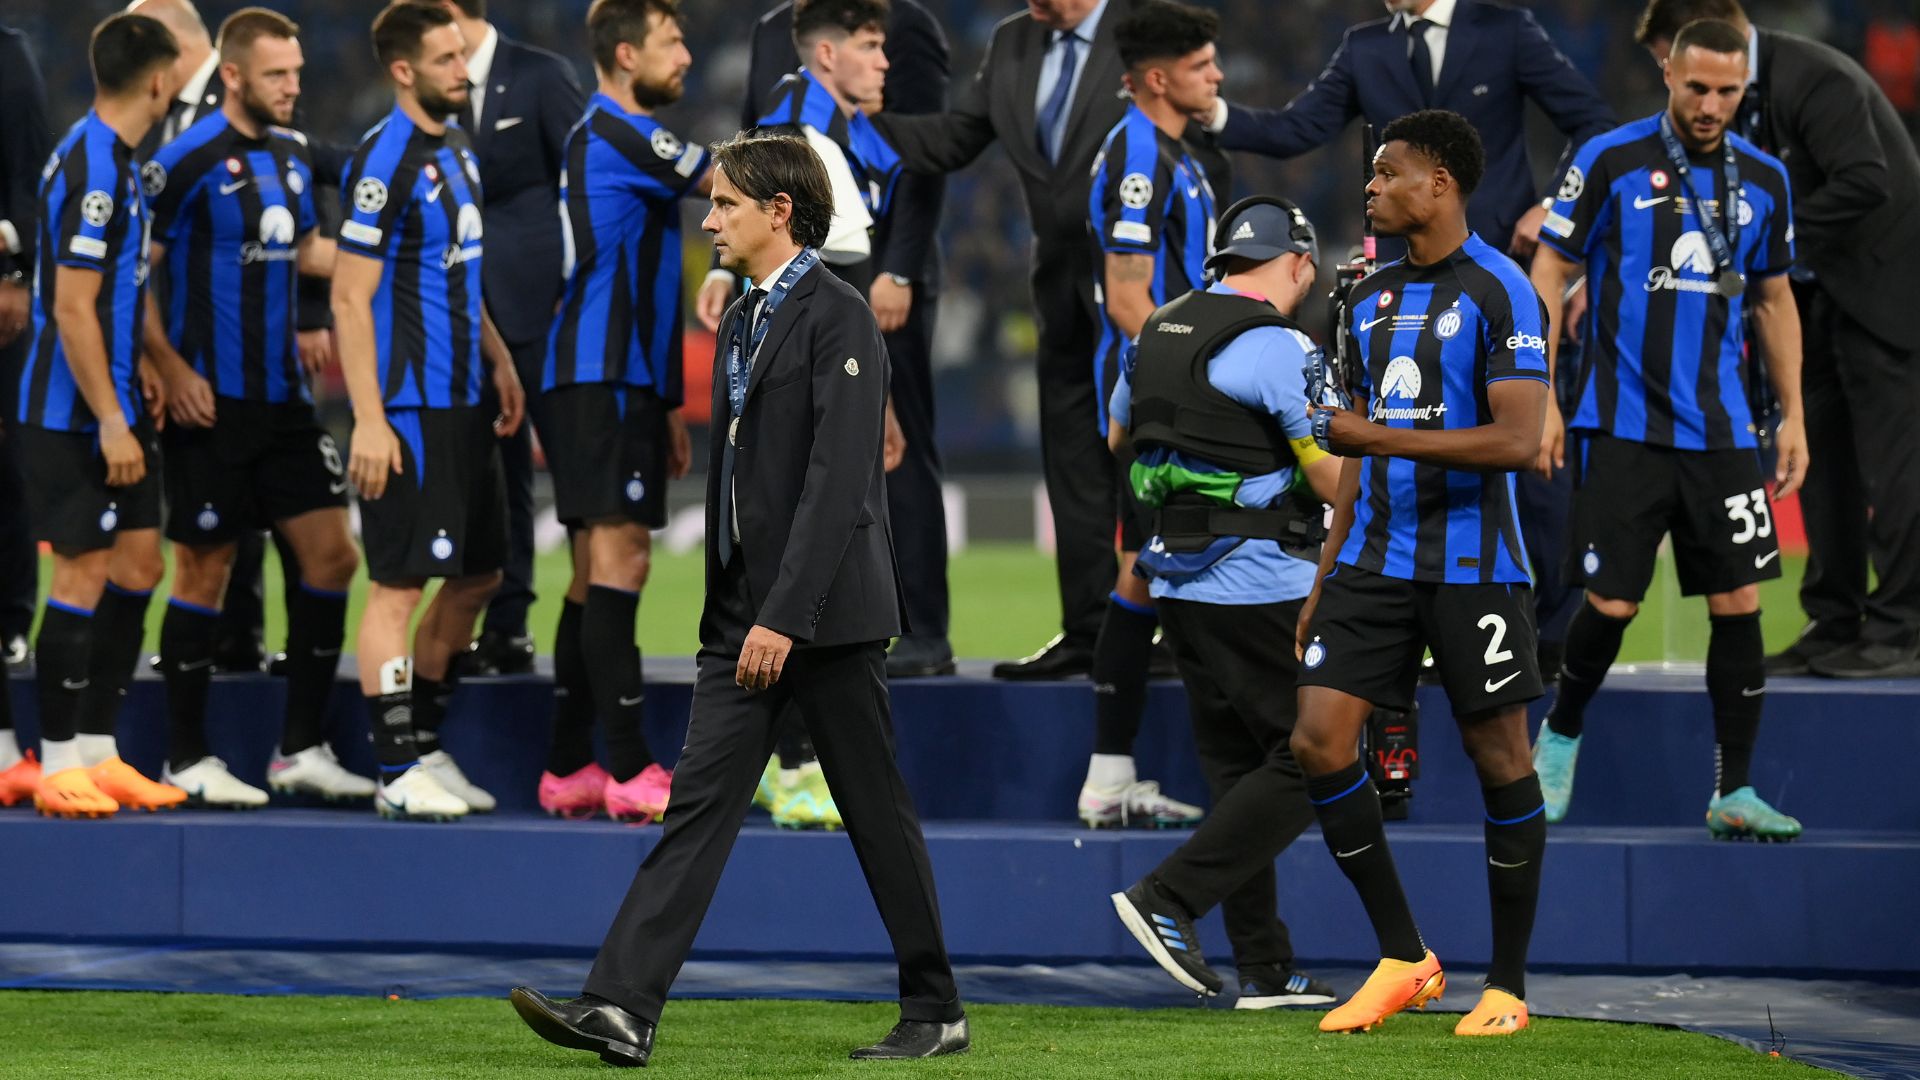 Inter Milan coach wins silver medal in Champions League final